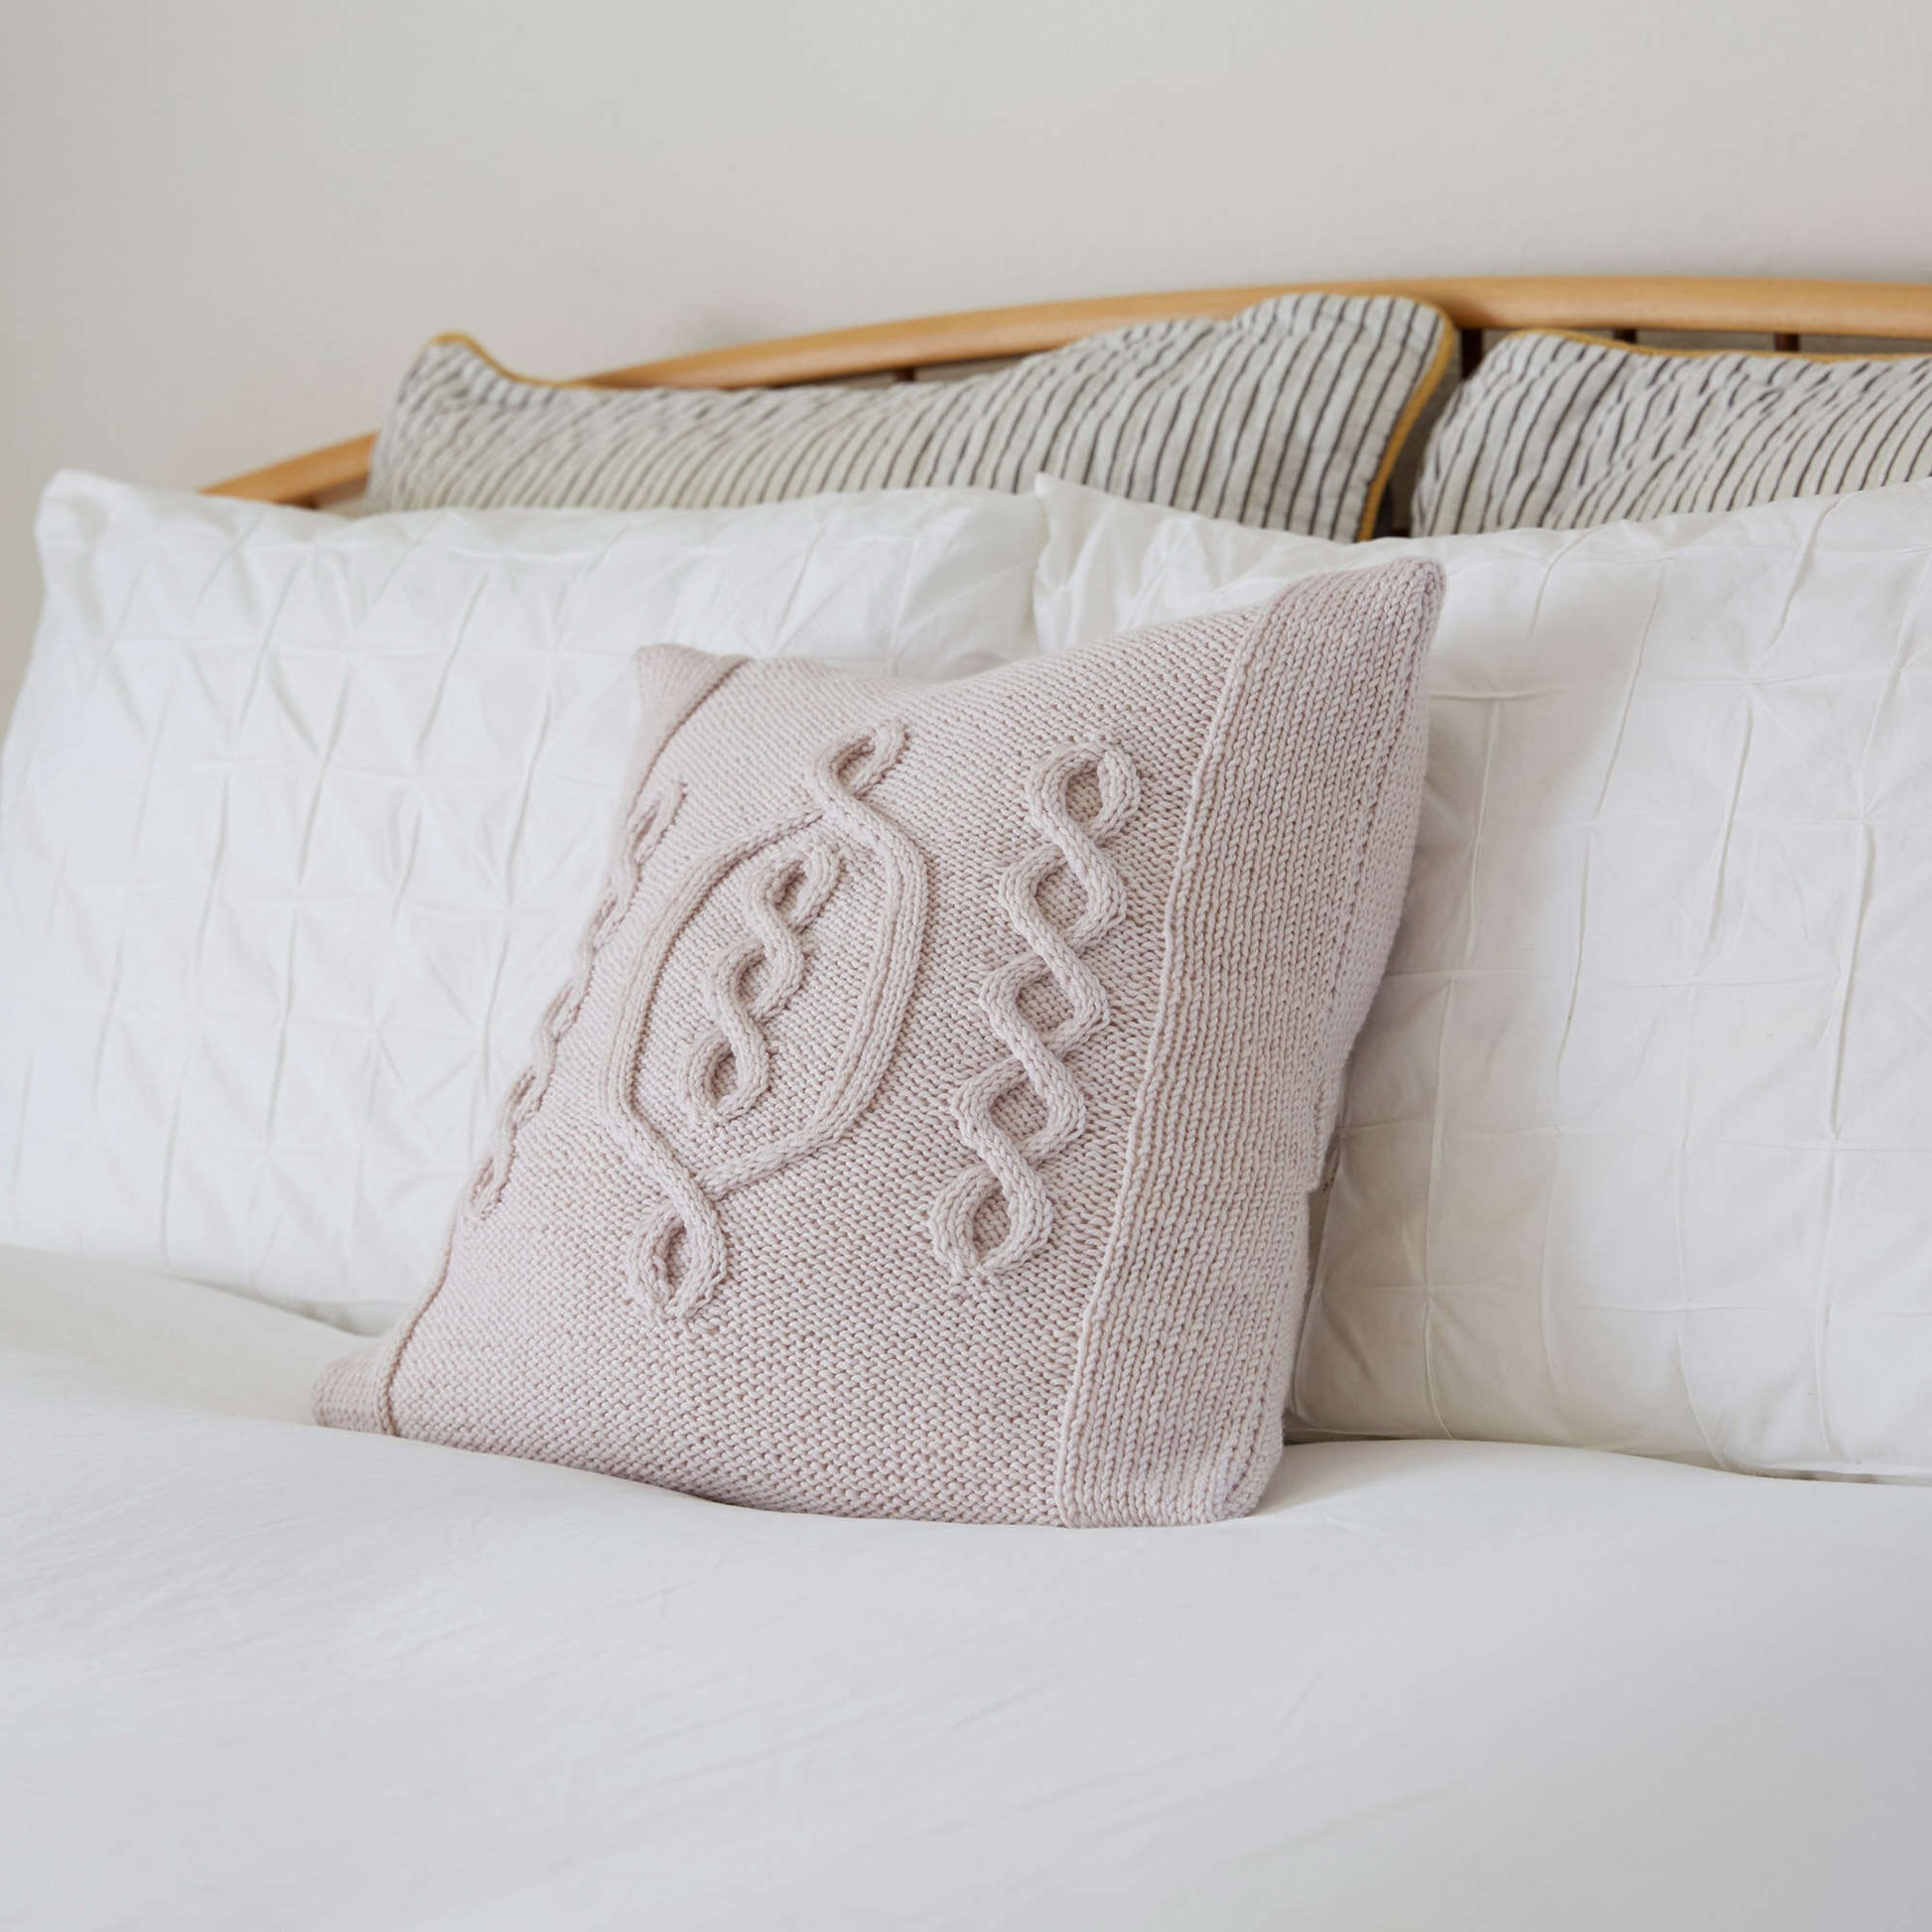 Free Red Heart Hygge Chic Knit Pillow Pattern